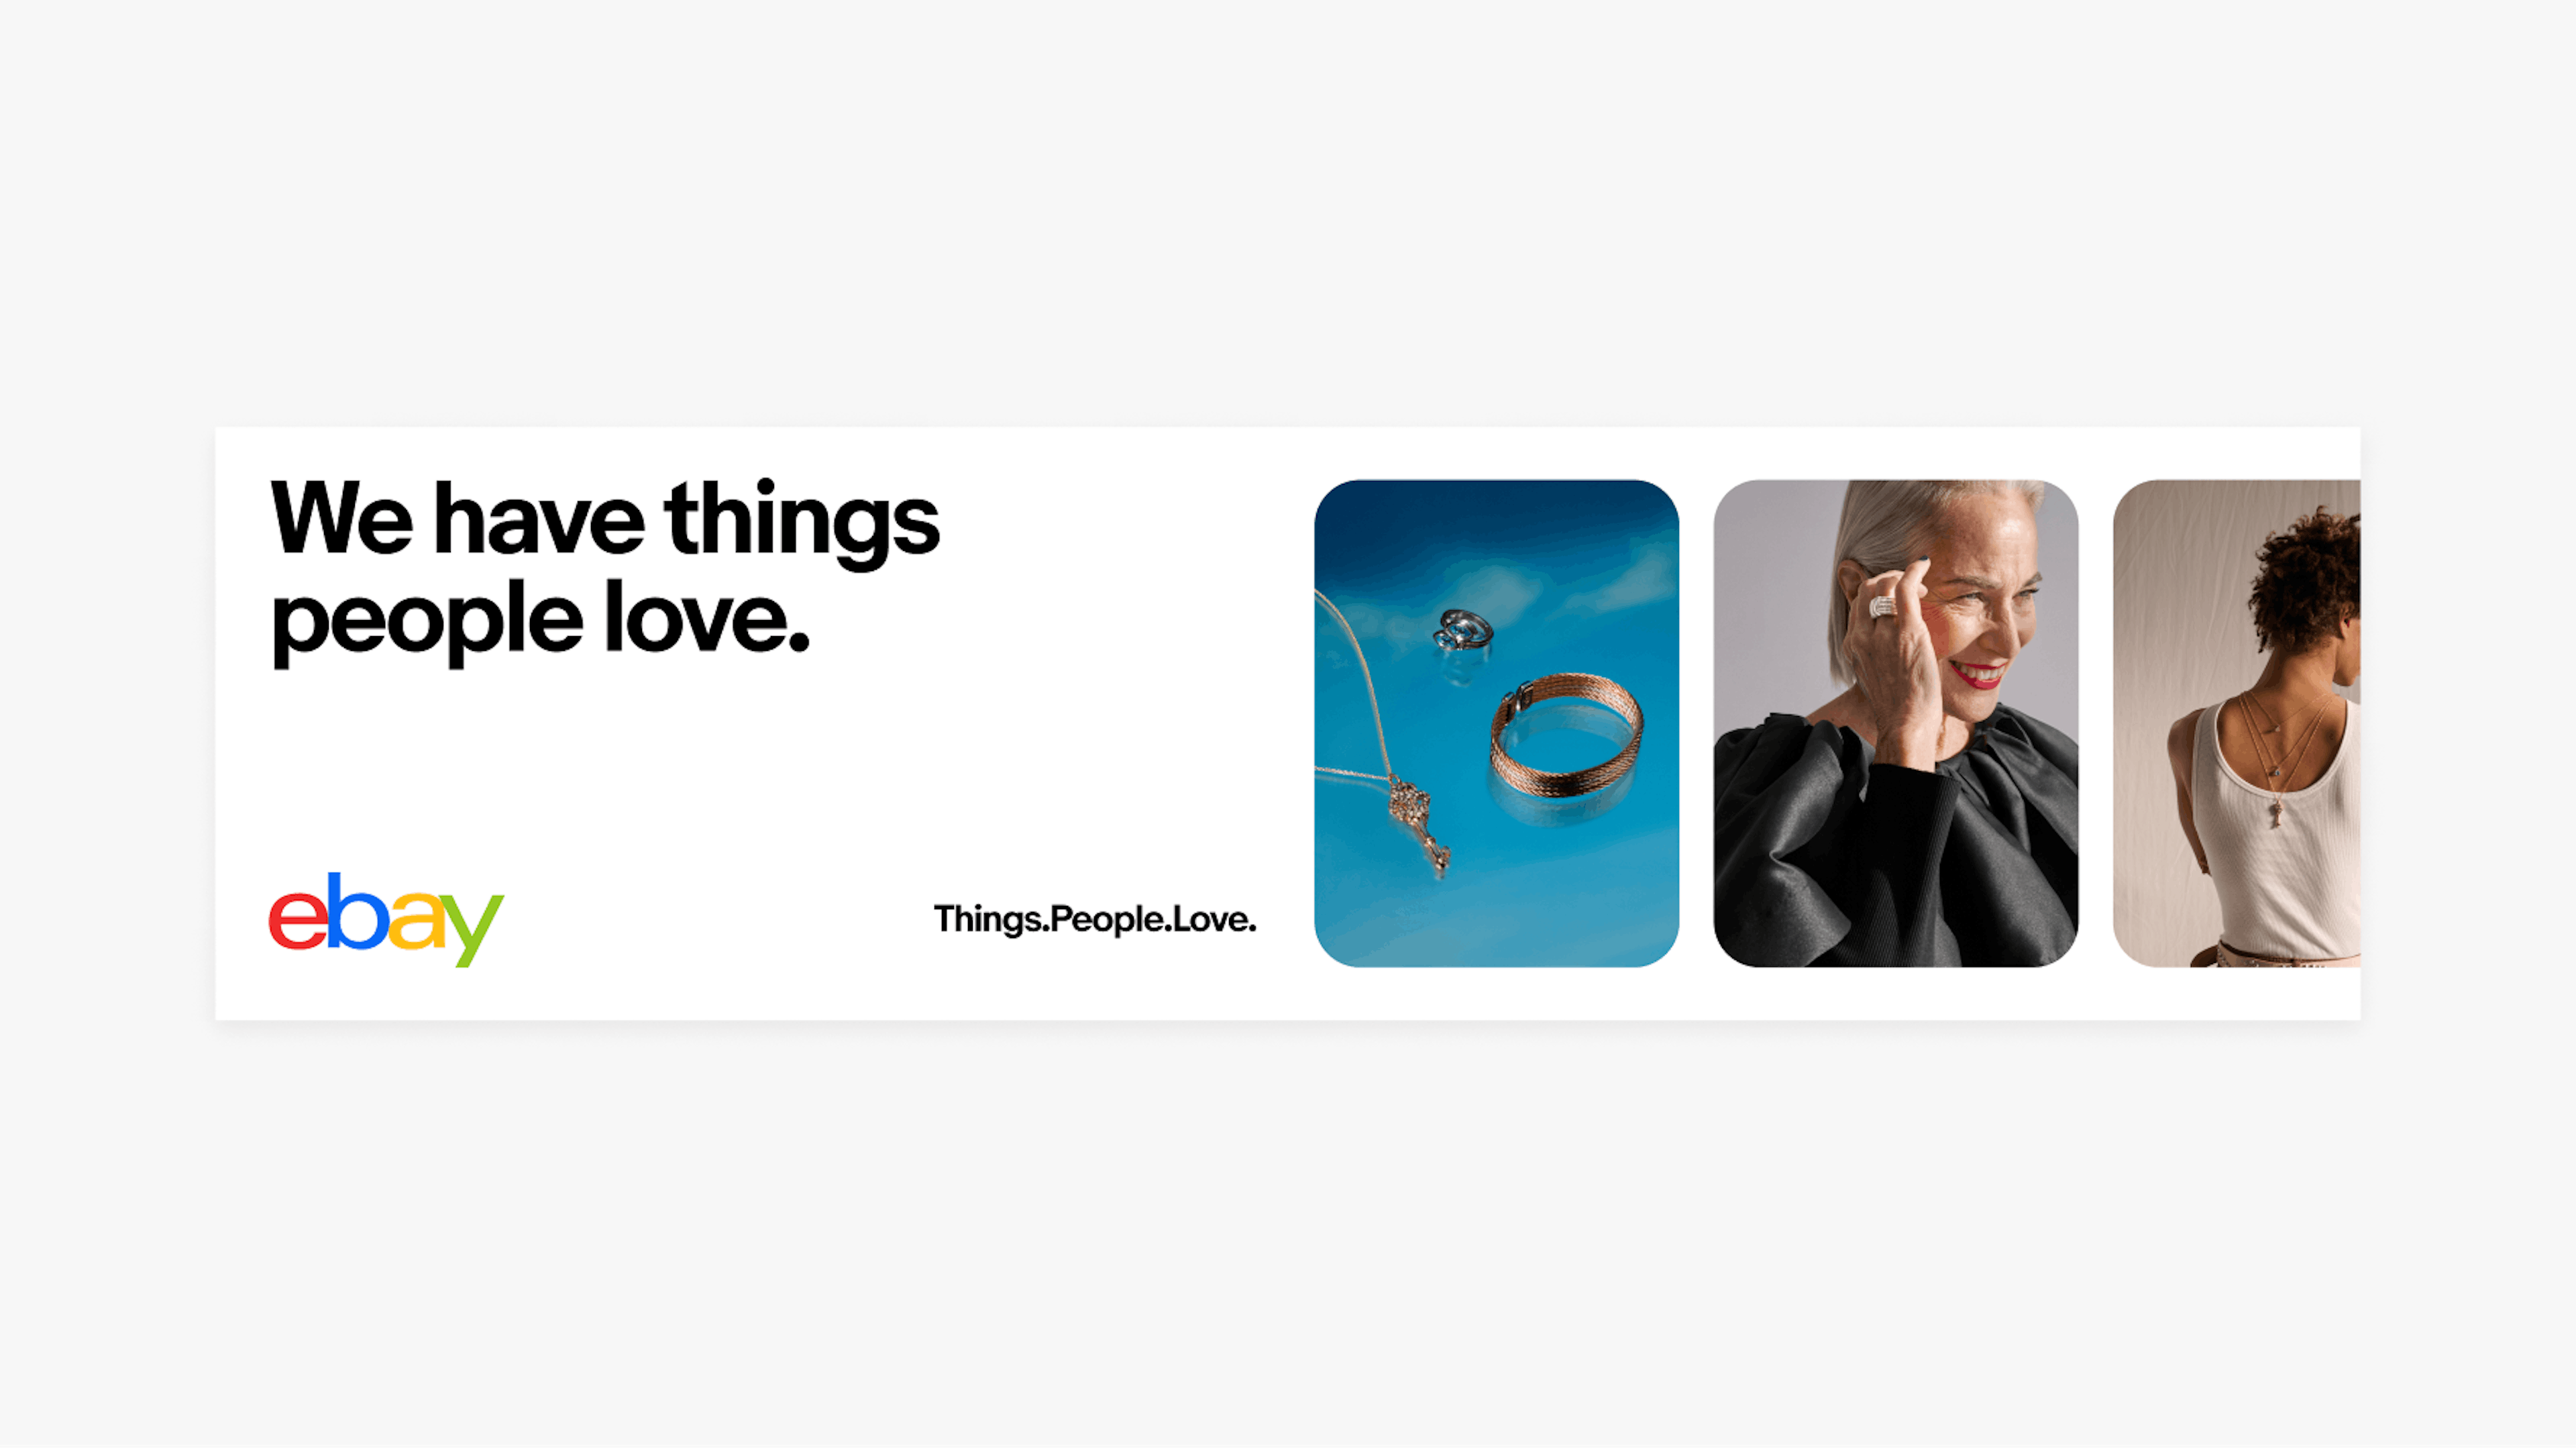 A skinny, horizontal eBay ad with the headline “We have things people love.”. The eBay logo is in the bottom left, with tagline “Things.People.Love.” to the right of it. On the far right are three image related to fashion and jewelry that bleed off the edge.